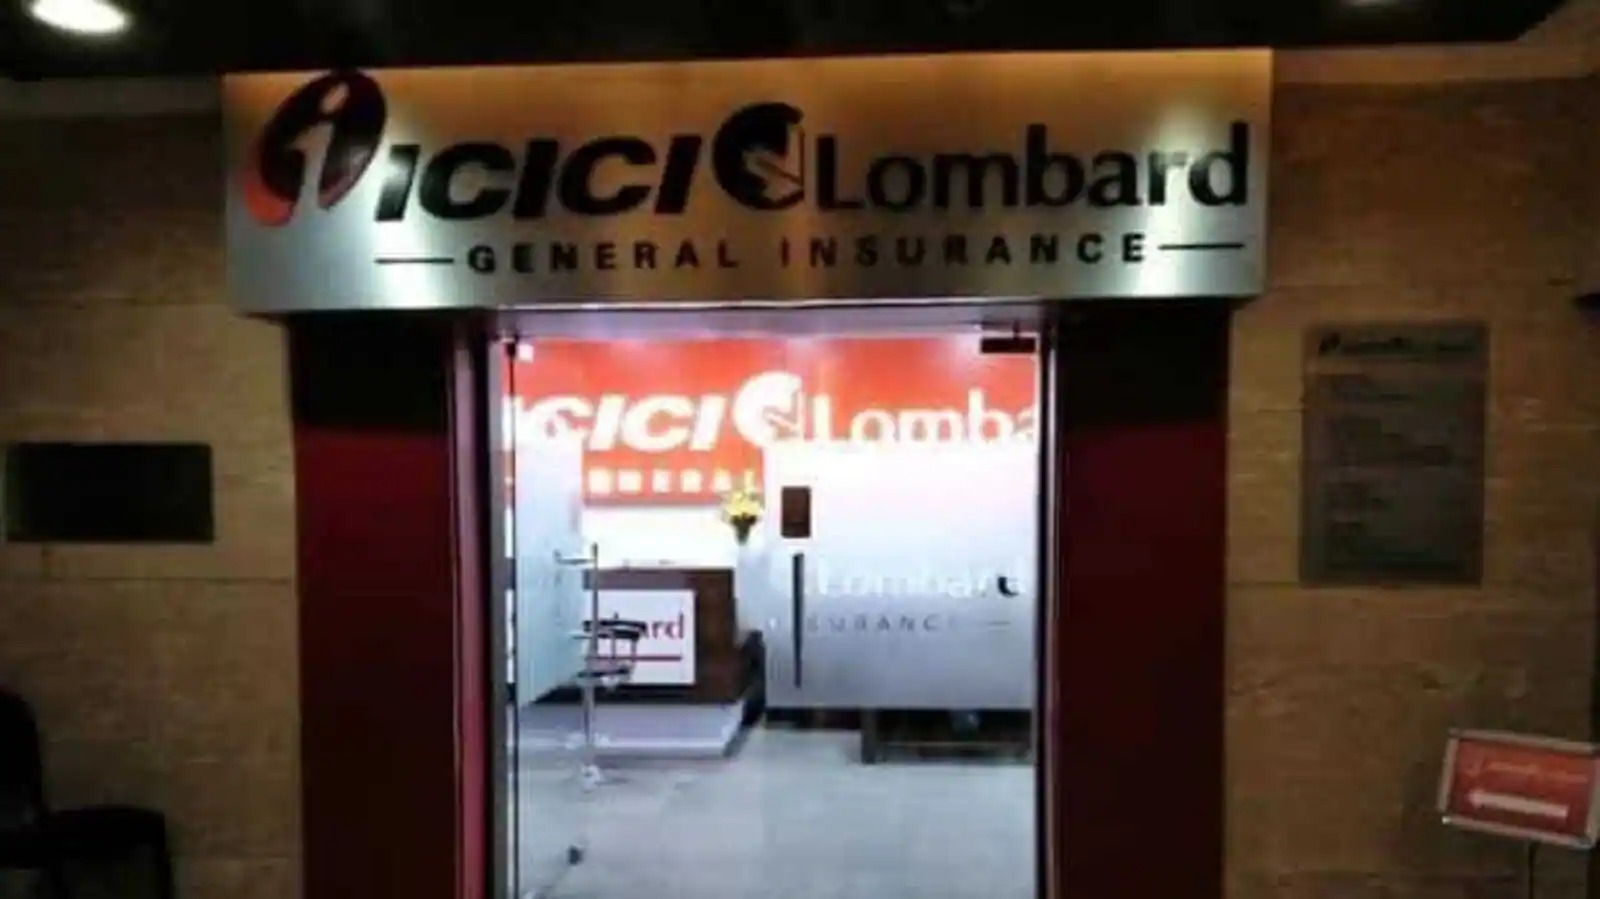 ICICI Lombard Surges 14% as ICICI Bank Plans to Buy Additional 4% Stake